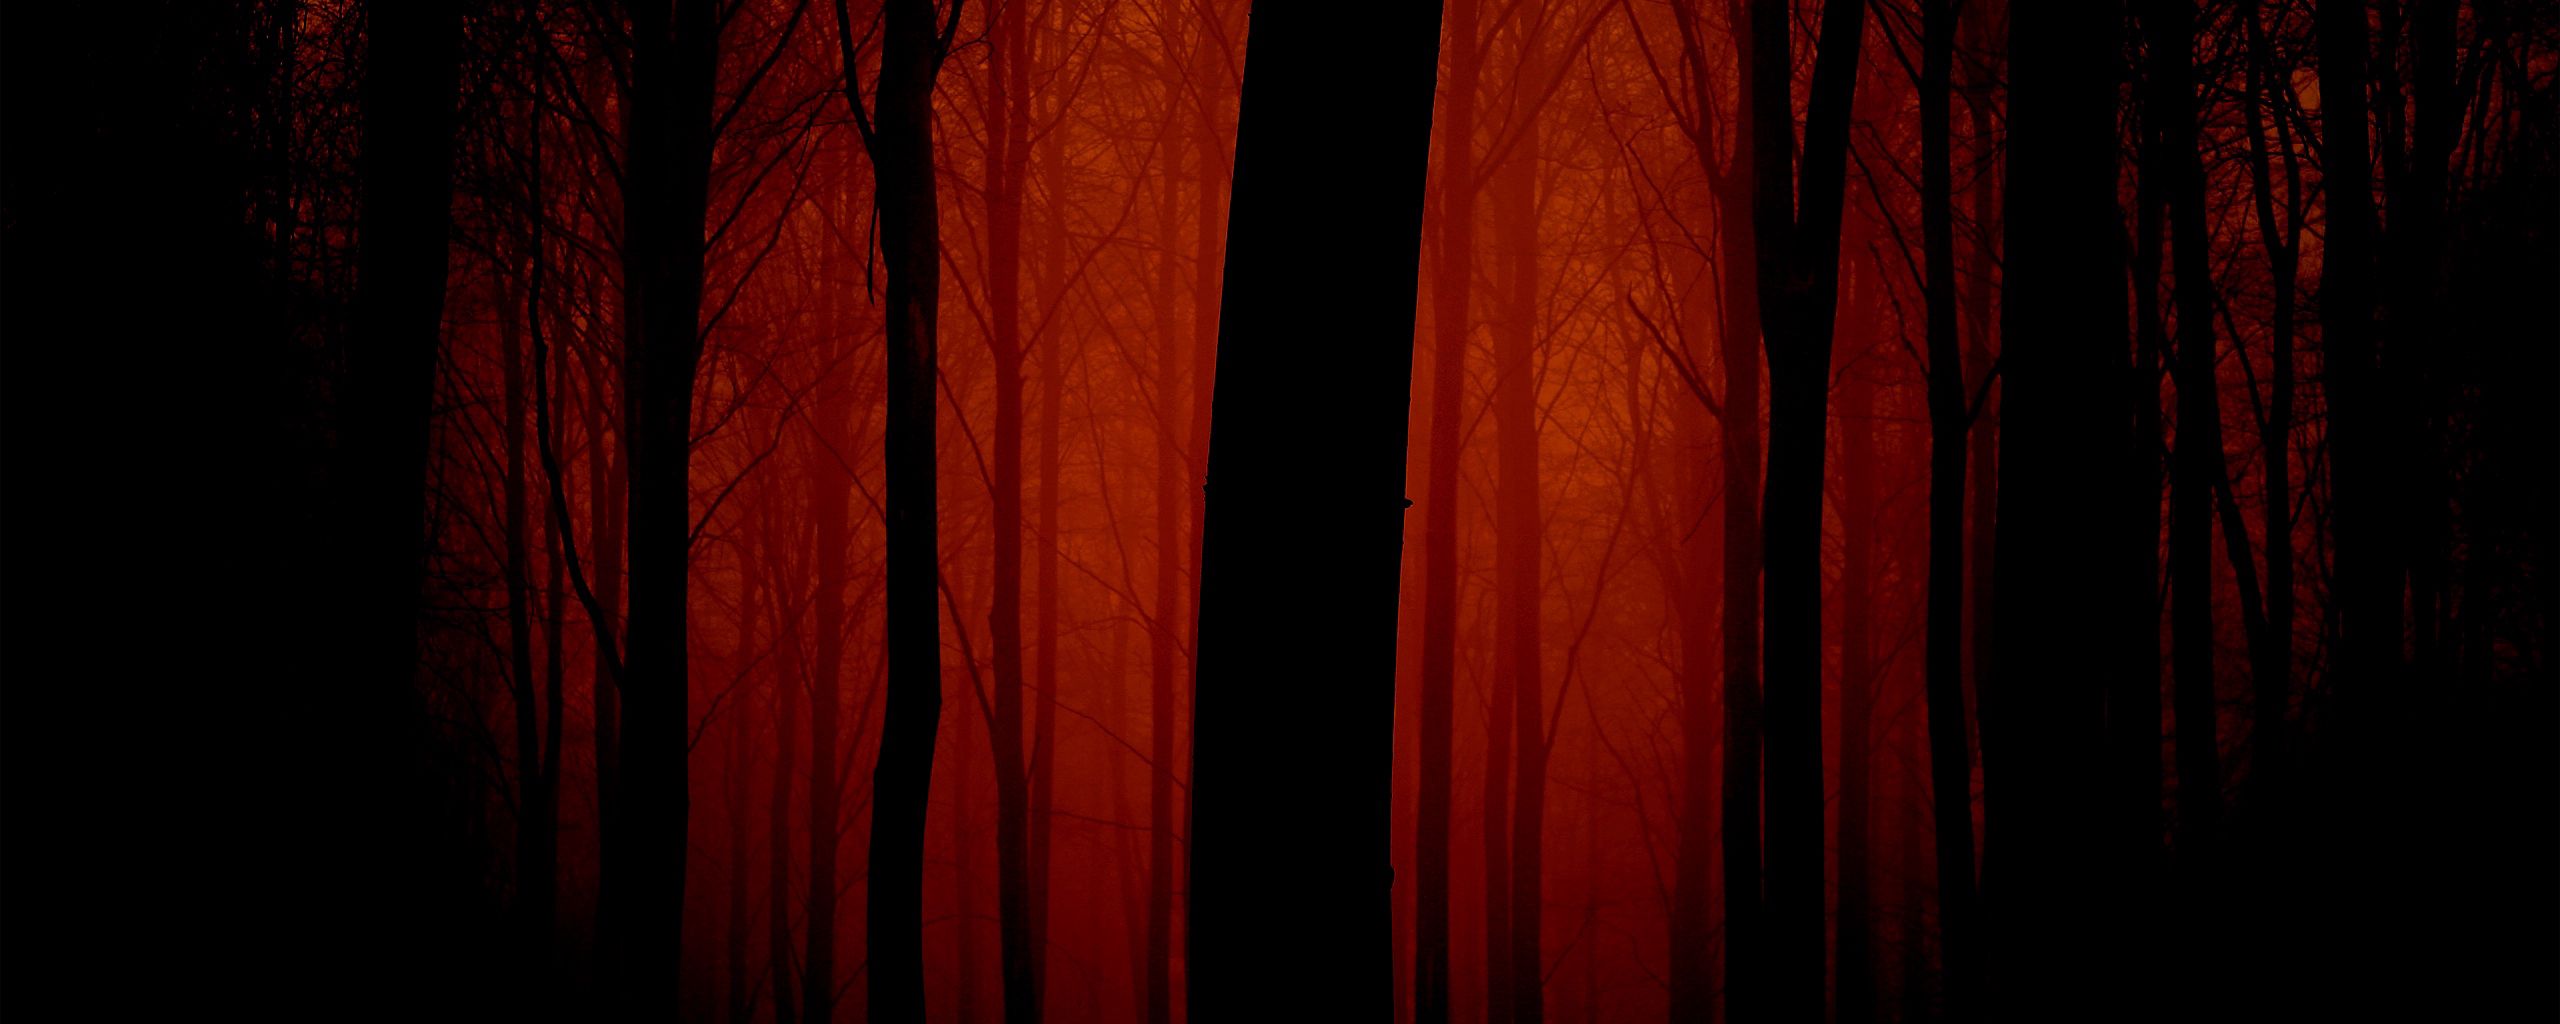 Download wallpaper 2560x1024 trees, outlines, evening, red, fog, light  ultrawide monitor hd background